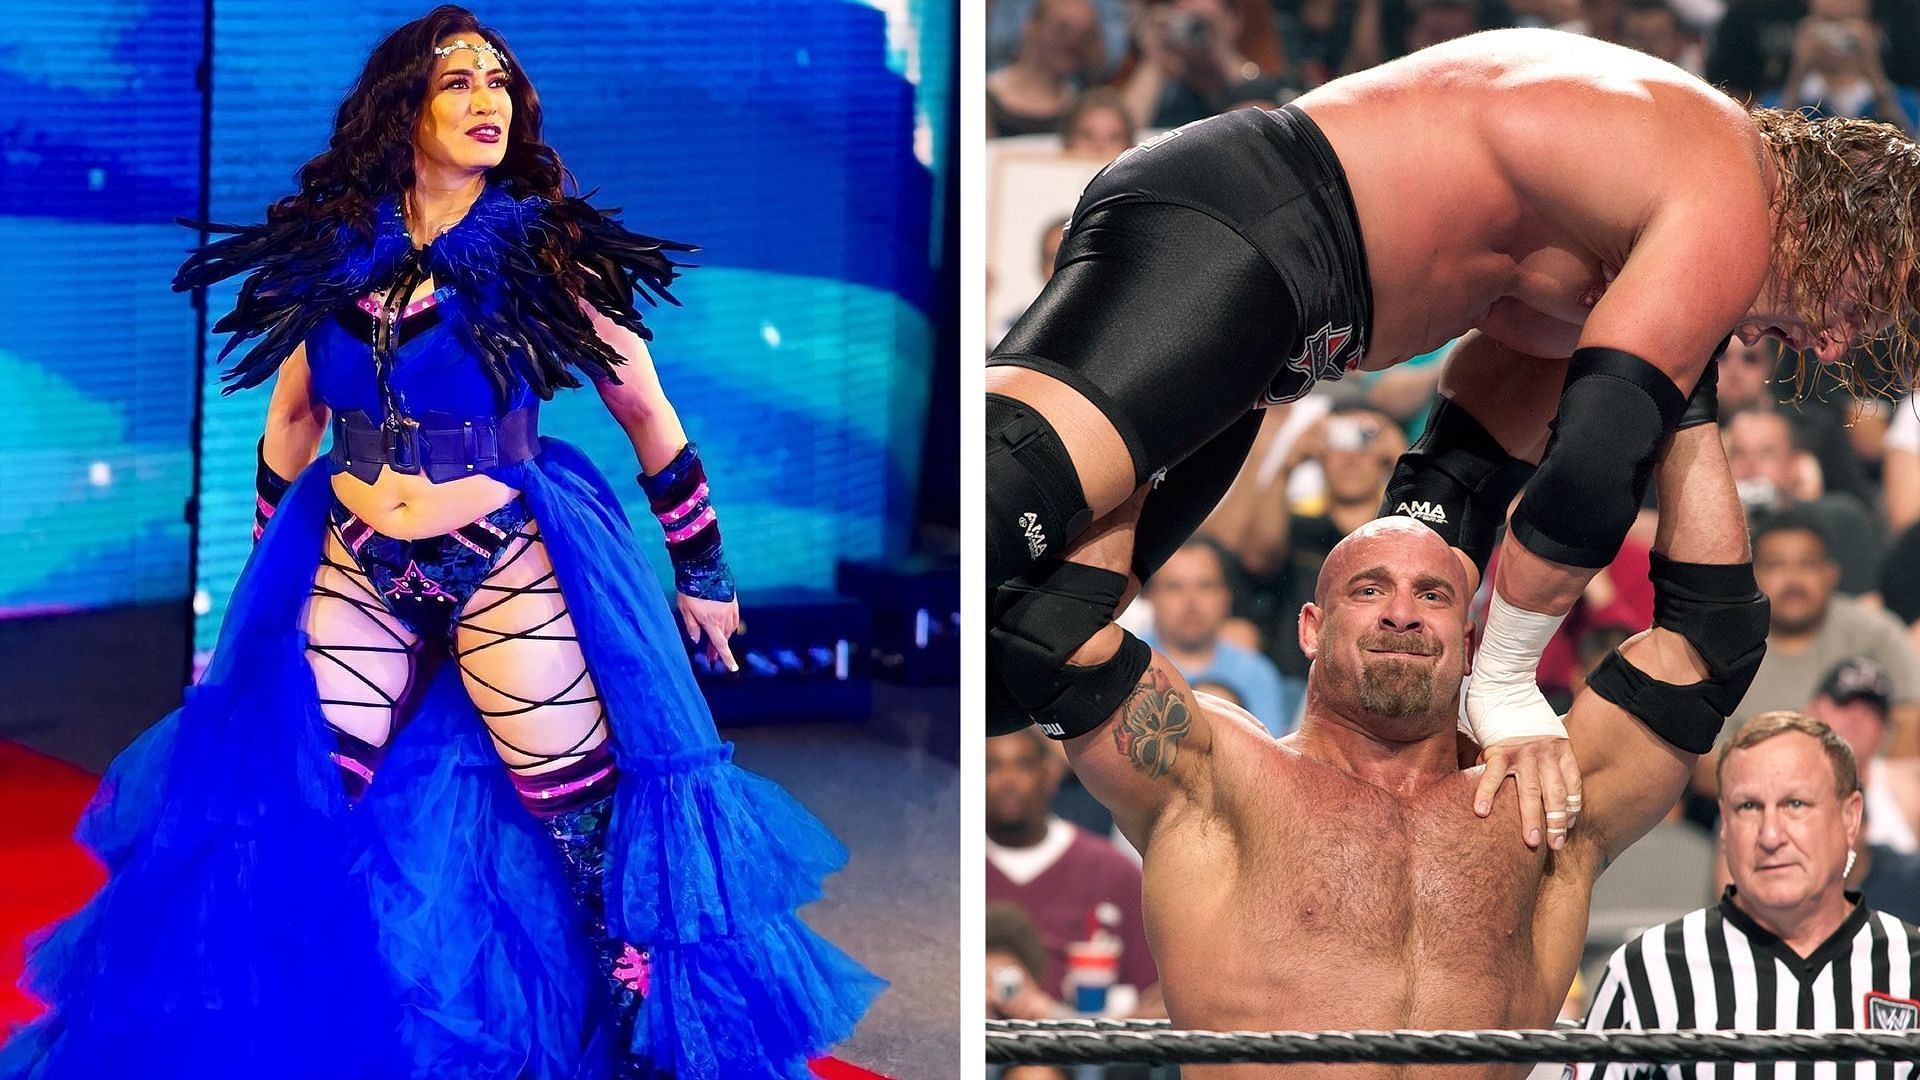 Key moments took place this week in WWE history